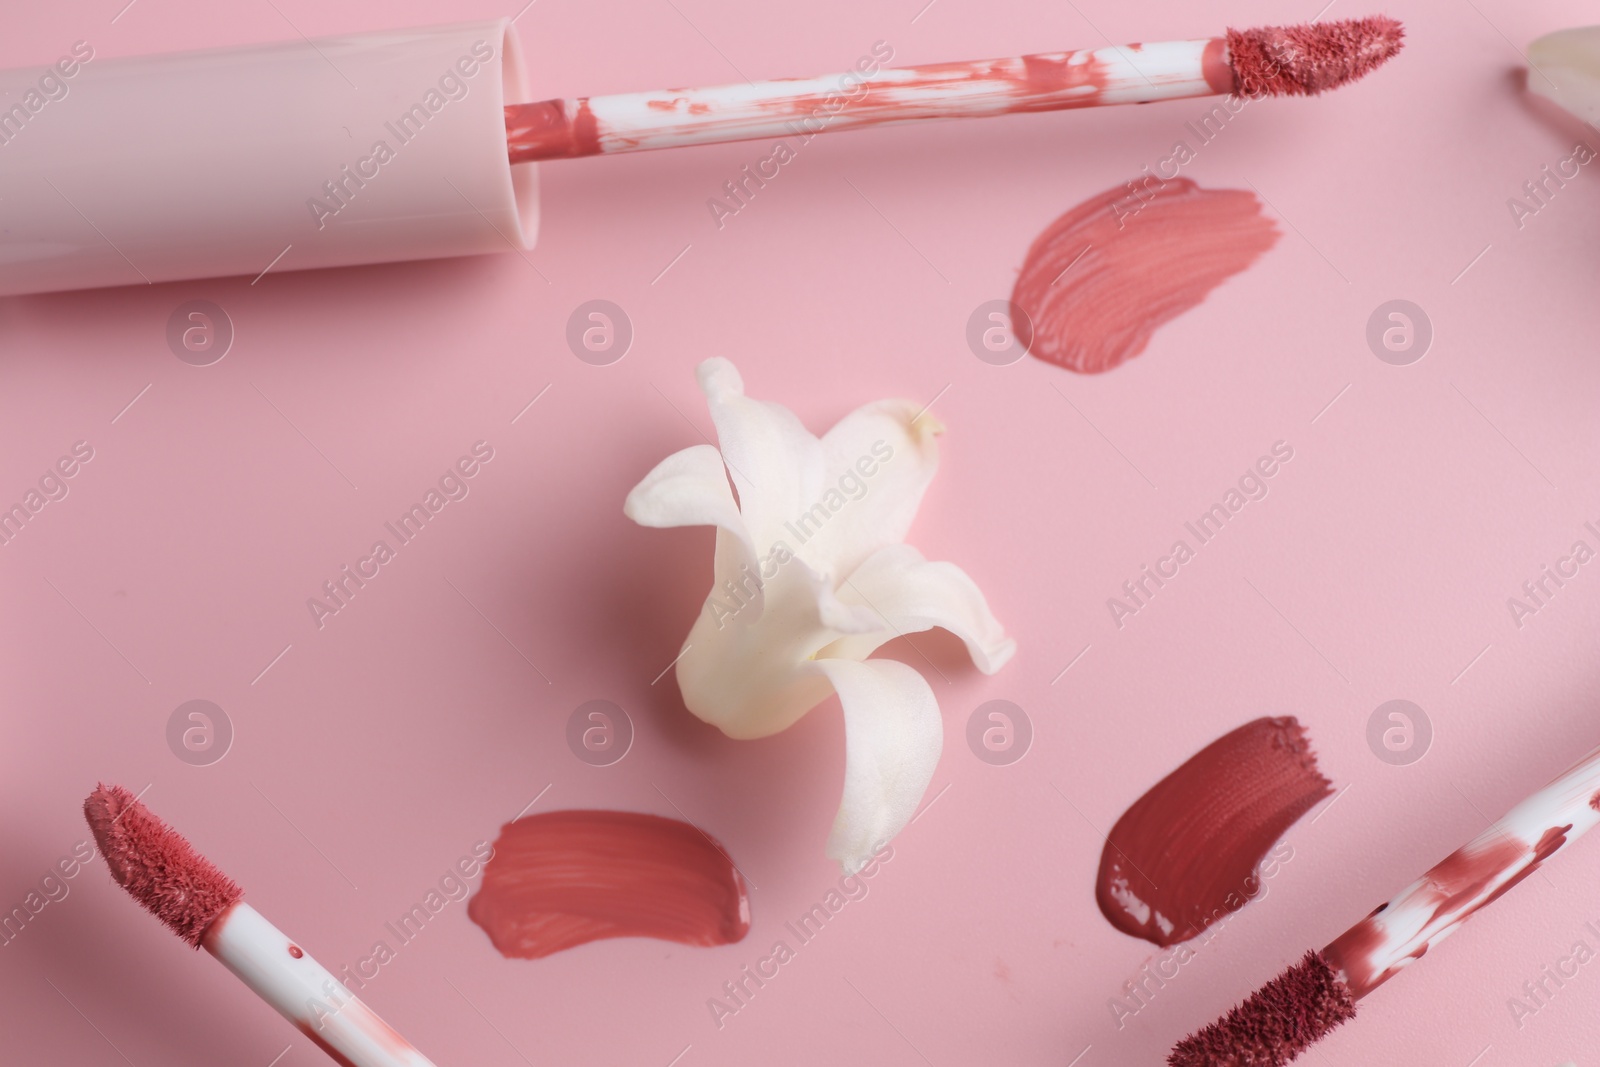 Photo of Different lip glosses, applicators and flower on pink background, flat lay